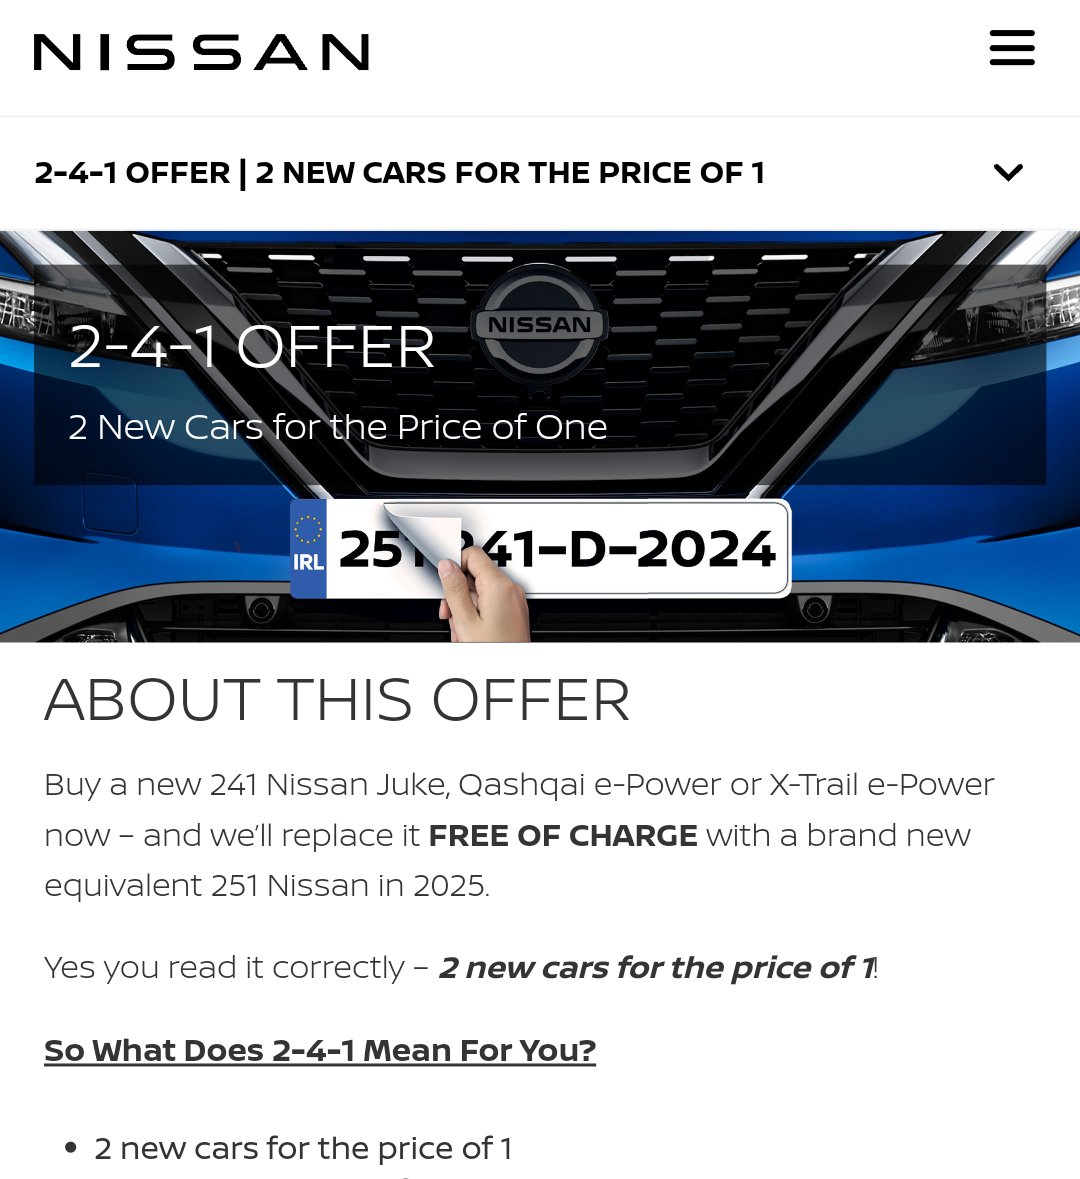 This is clearly false advertising '2 new cars for the price of 1' You'll never own 2 cars, they'll replace the 2024 car for a 2025 car. It's a free upgrade! FFS @NissanIreland @The_ASAI @CCPCIreland